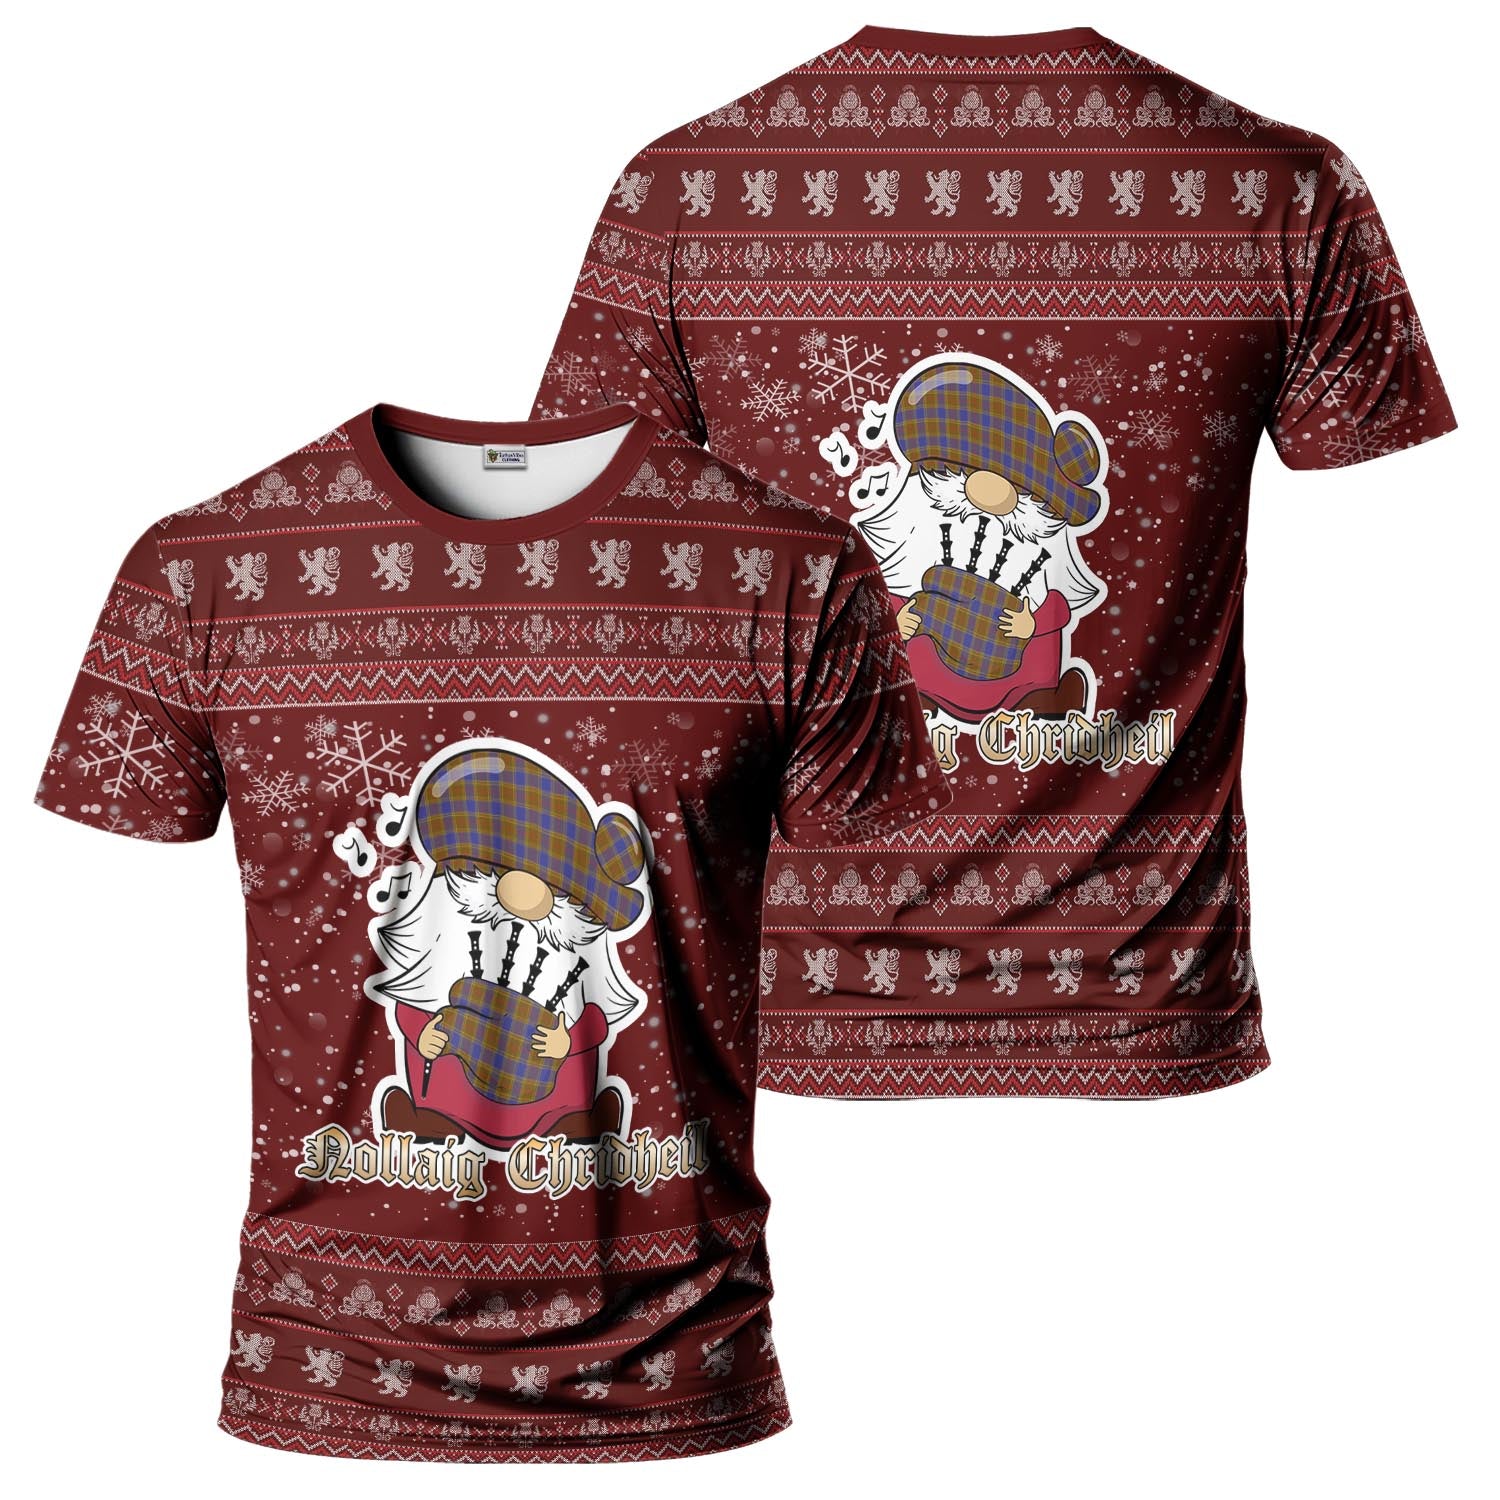 Balfour Modern Clan Christmas Family T-Shirt with Funny Gnome Playing Bagpipes - Tartanvibesclothing